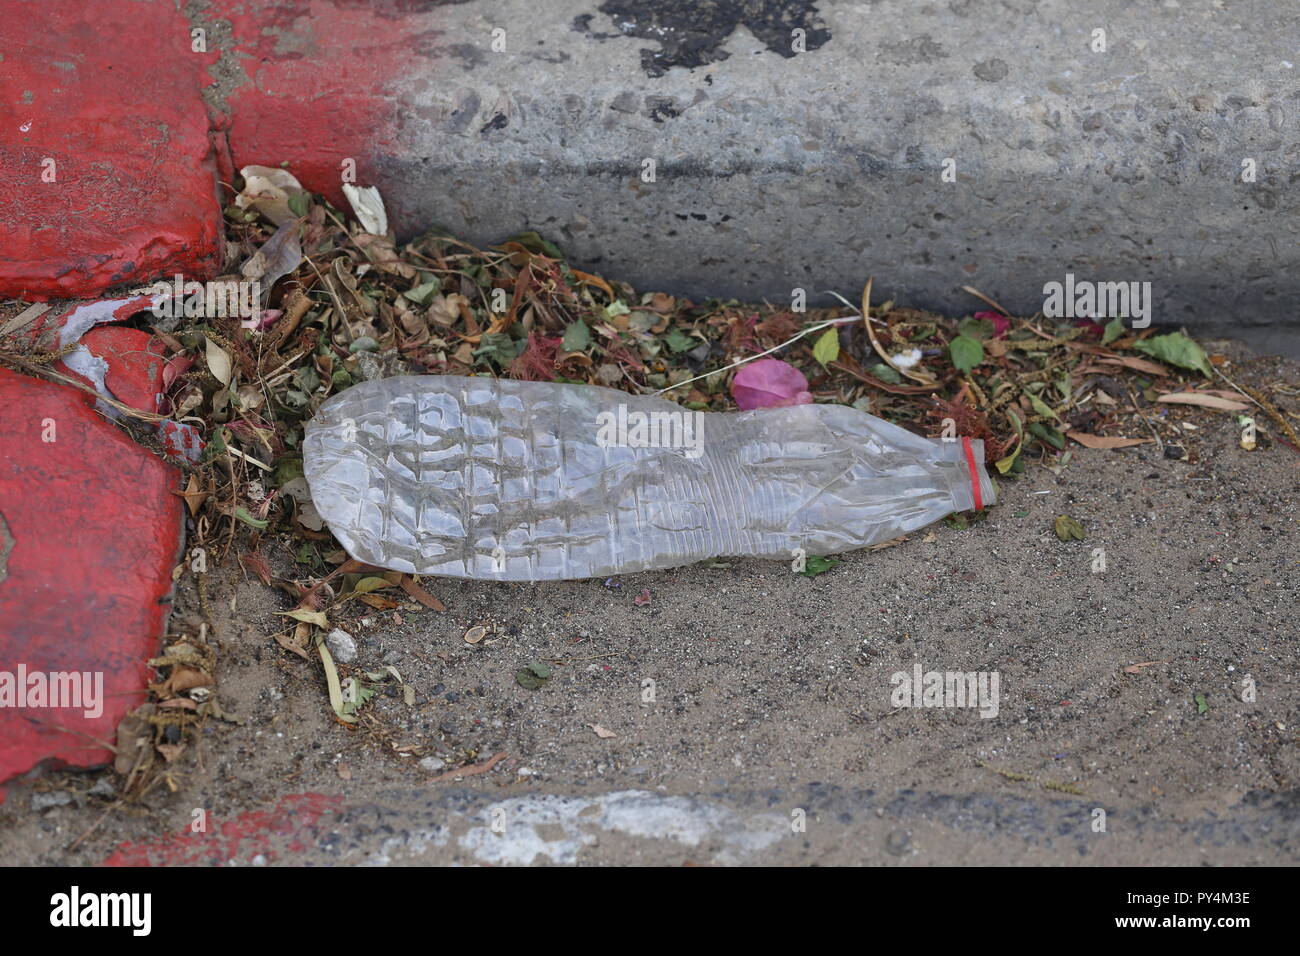 Crushed Plastic Bottle on the Asphalt road. Squeezed plastic bottle on the road on a stack of dry leaves. Disposable bottle thrown away on the ground, Stock Photo